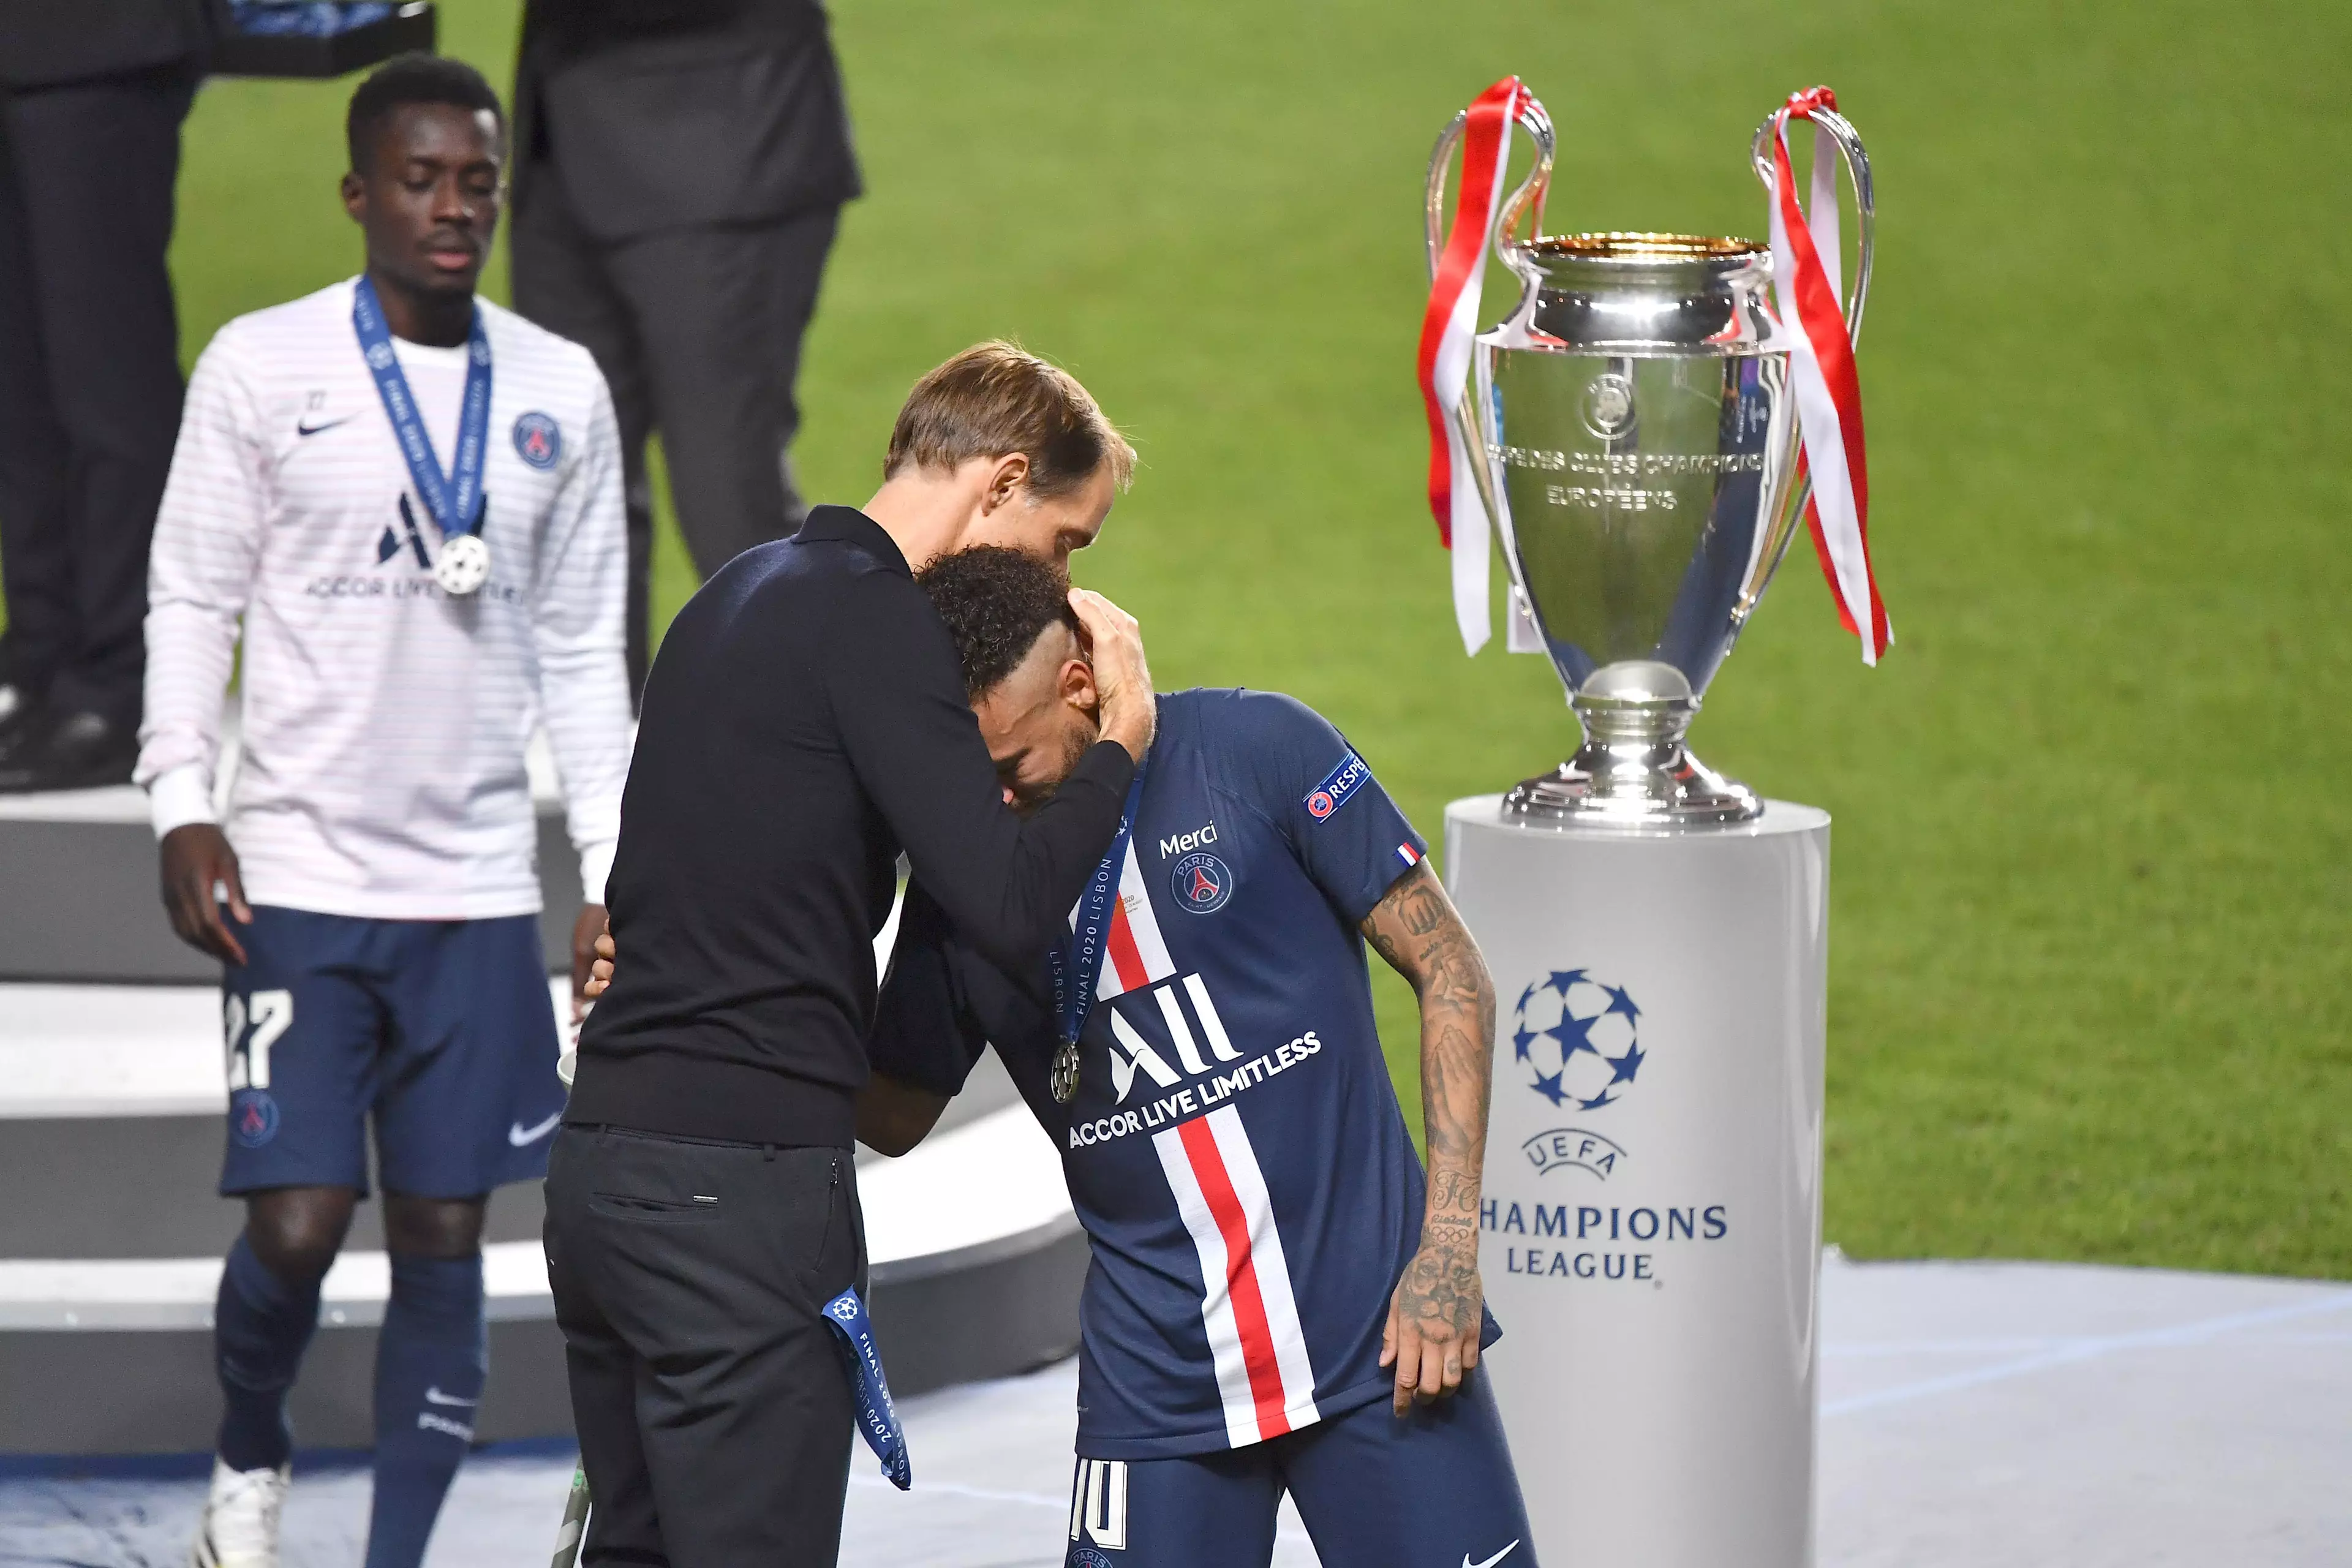 Neymar was left gutted by the Champions League final defeat. Image: PA Images